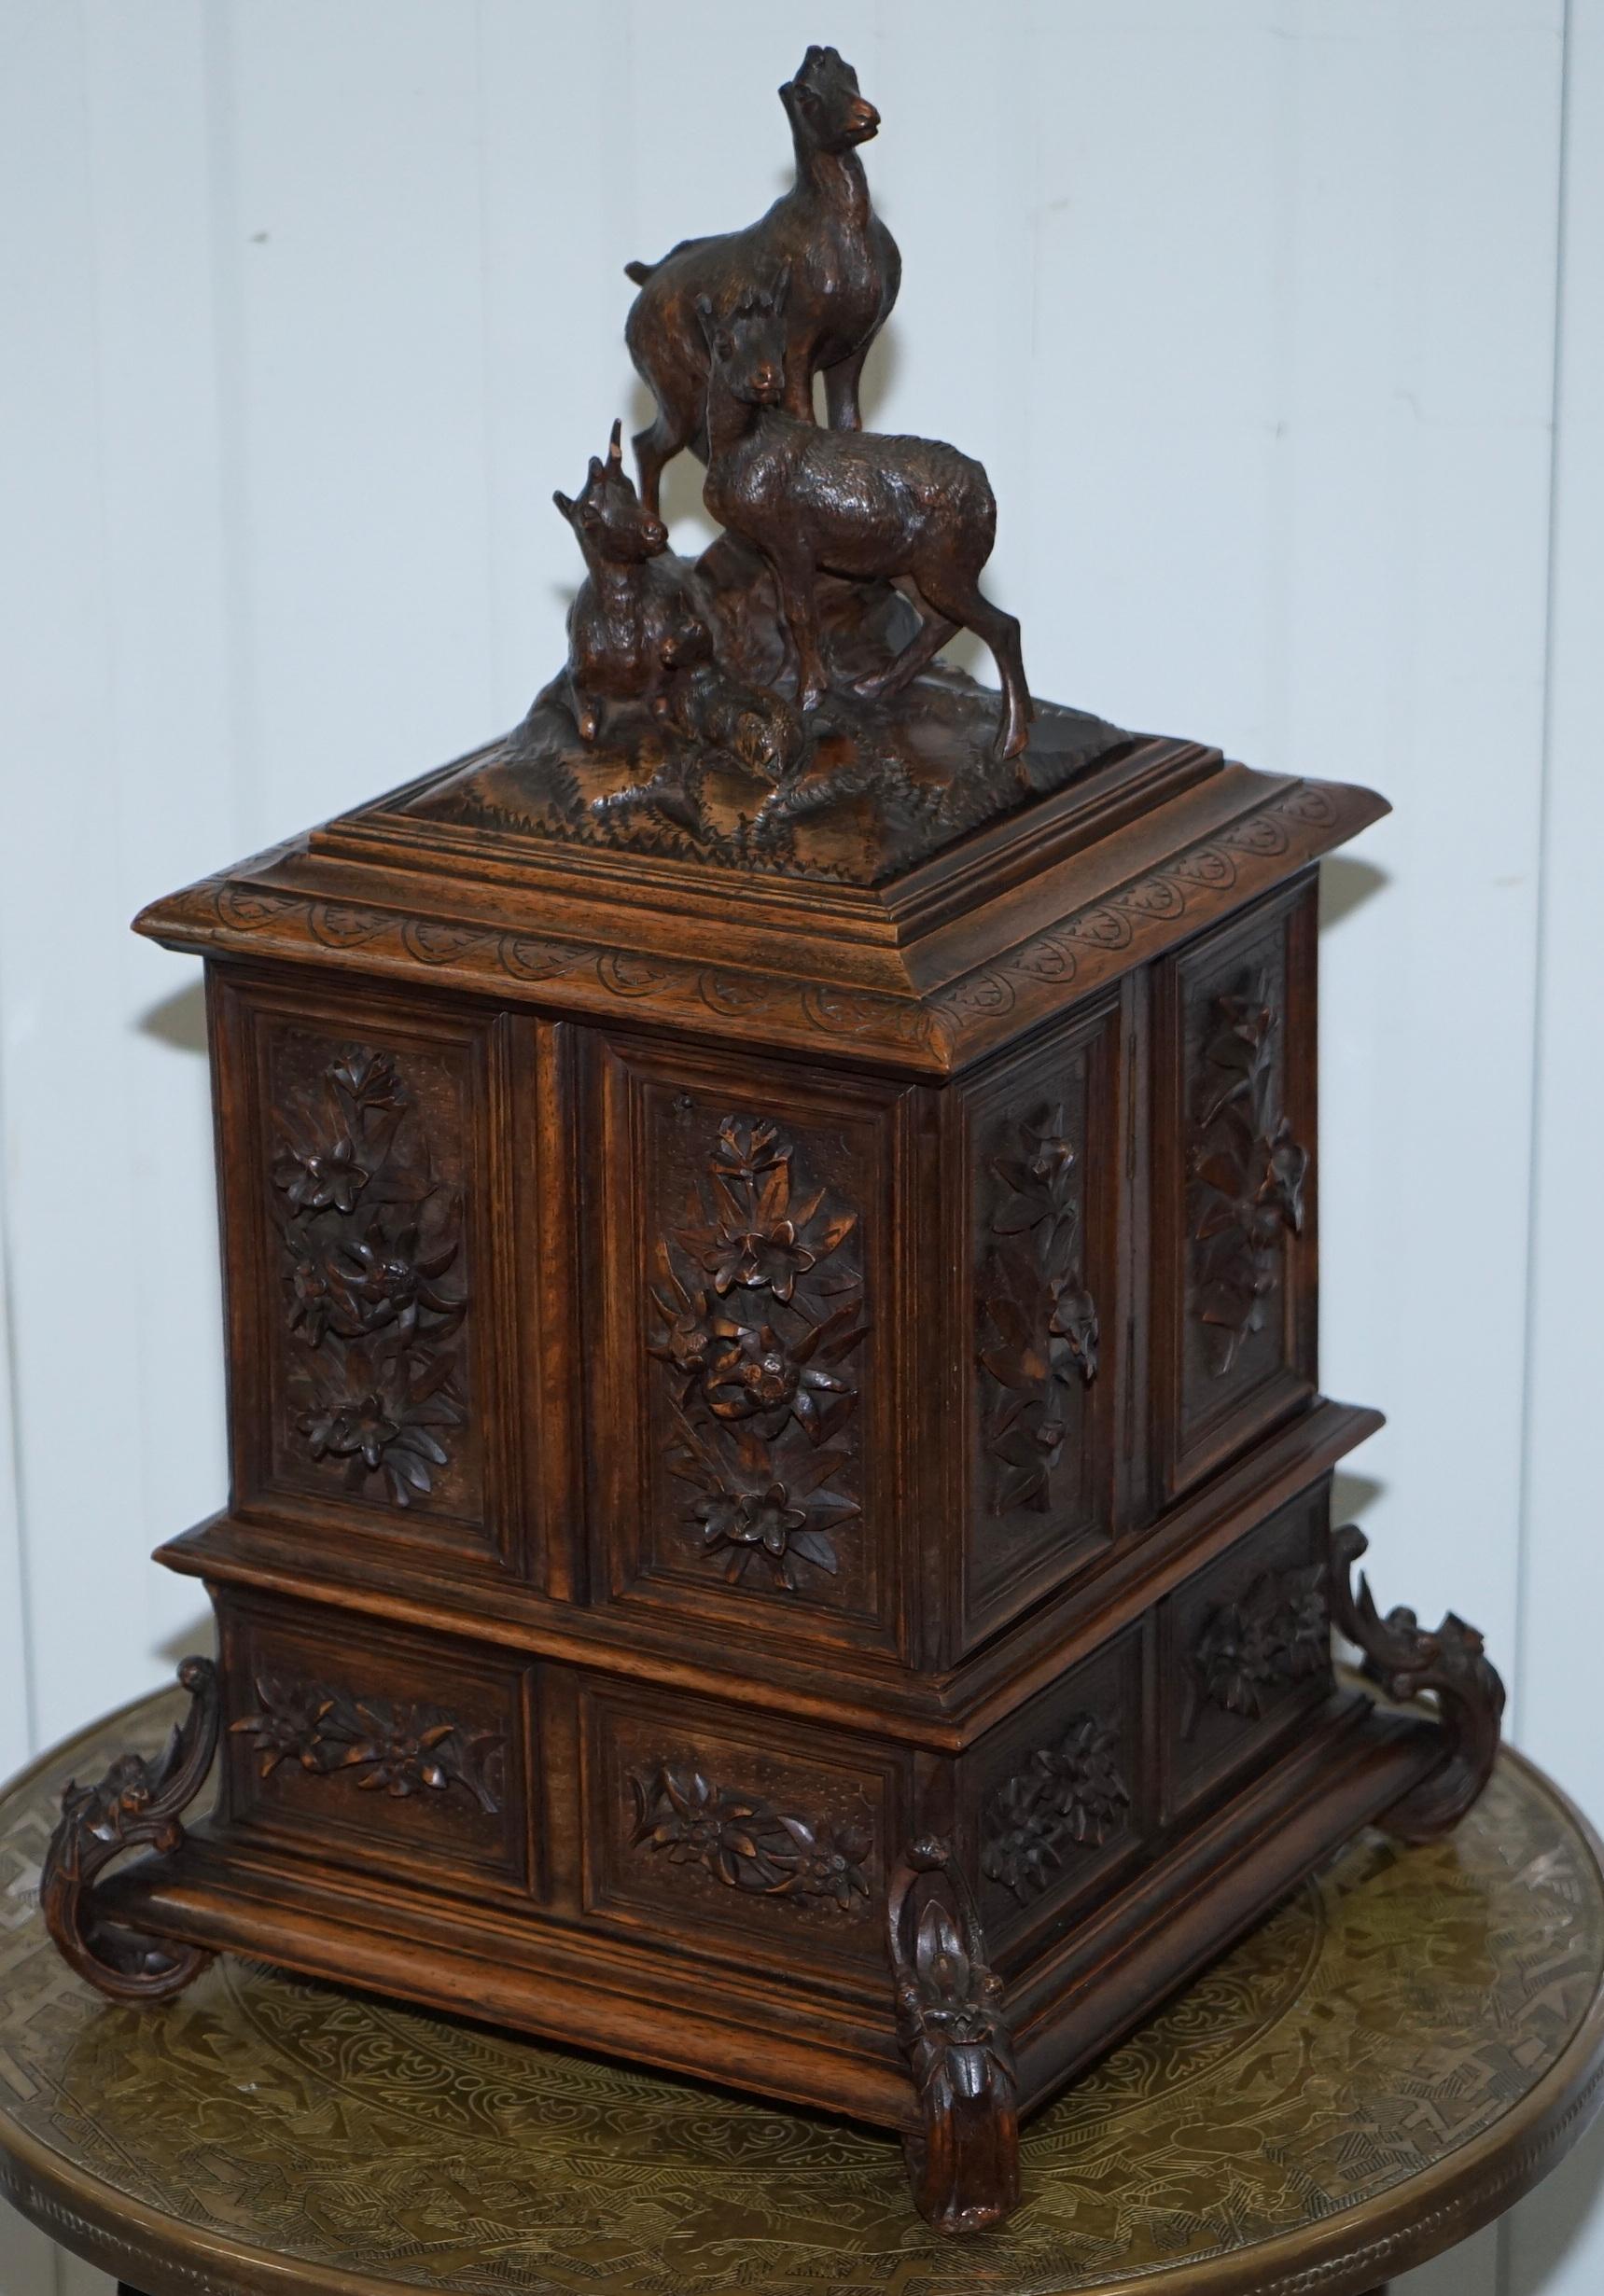 English Large Ornately Carved Black Forest 19th Century Jewellery Box Chesterfield Silk